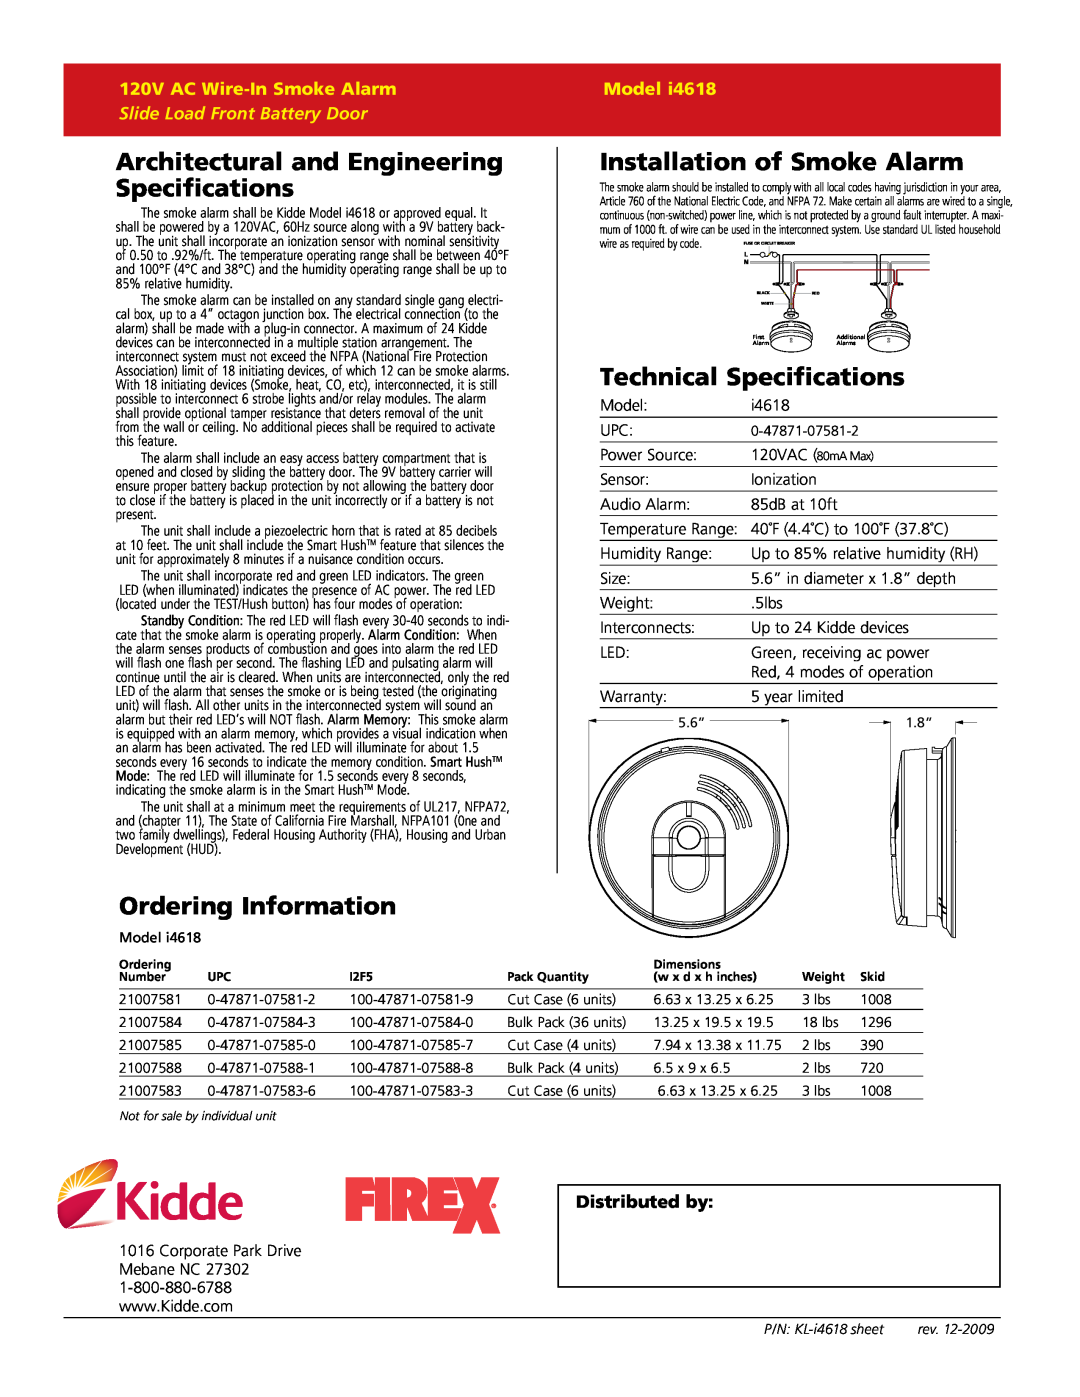 Kidde I4618 Architectural and Engineering, Installation of Smoke Alarm, Technical Specifications, Ordering Information 